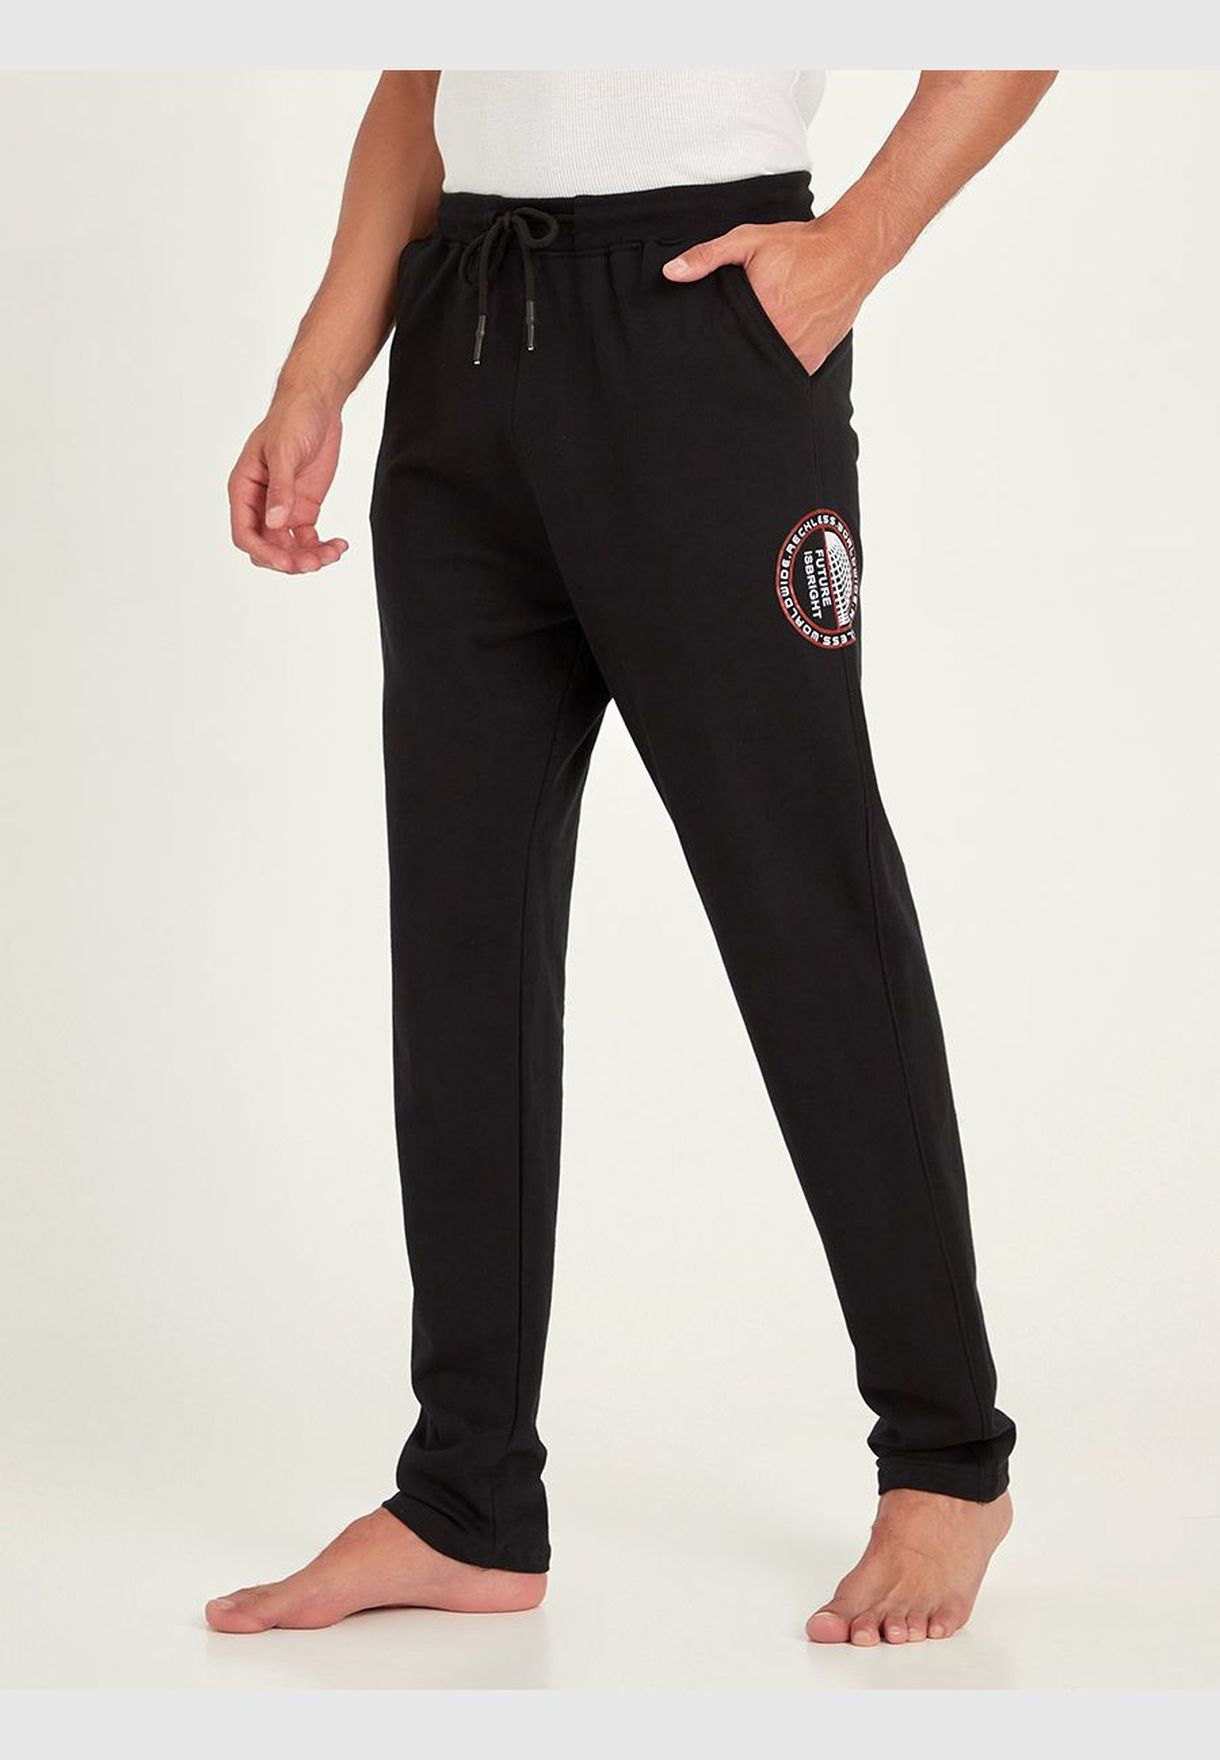 Placement Print Regular Fit Lounge Pants with Drawstring